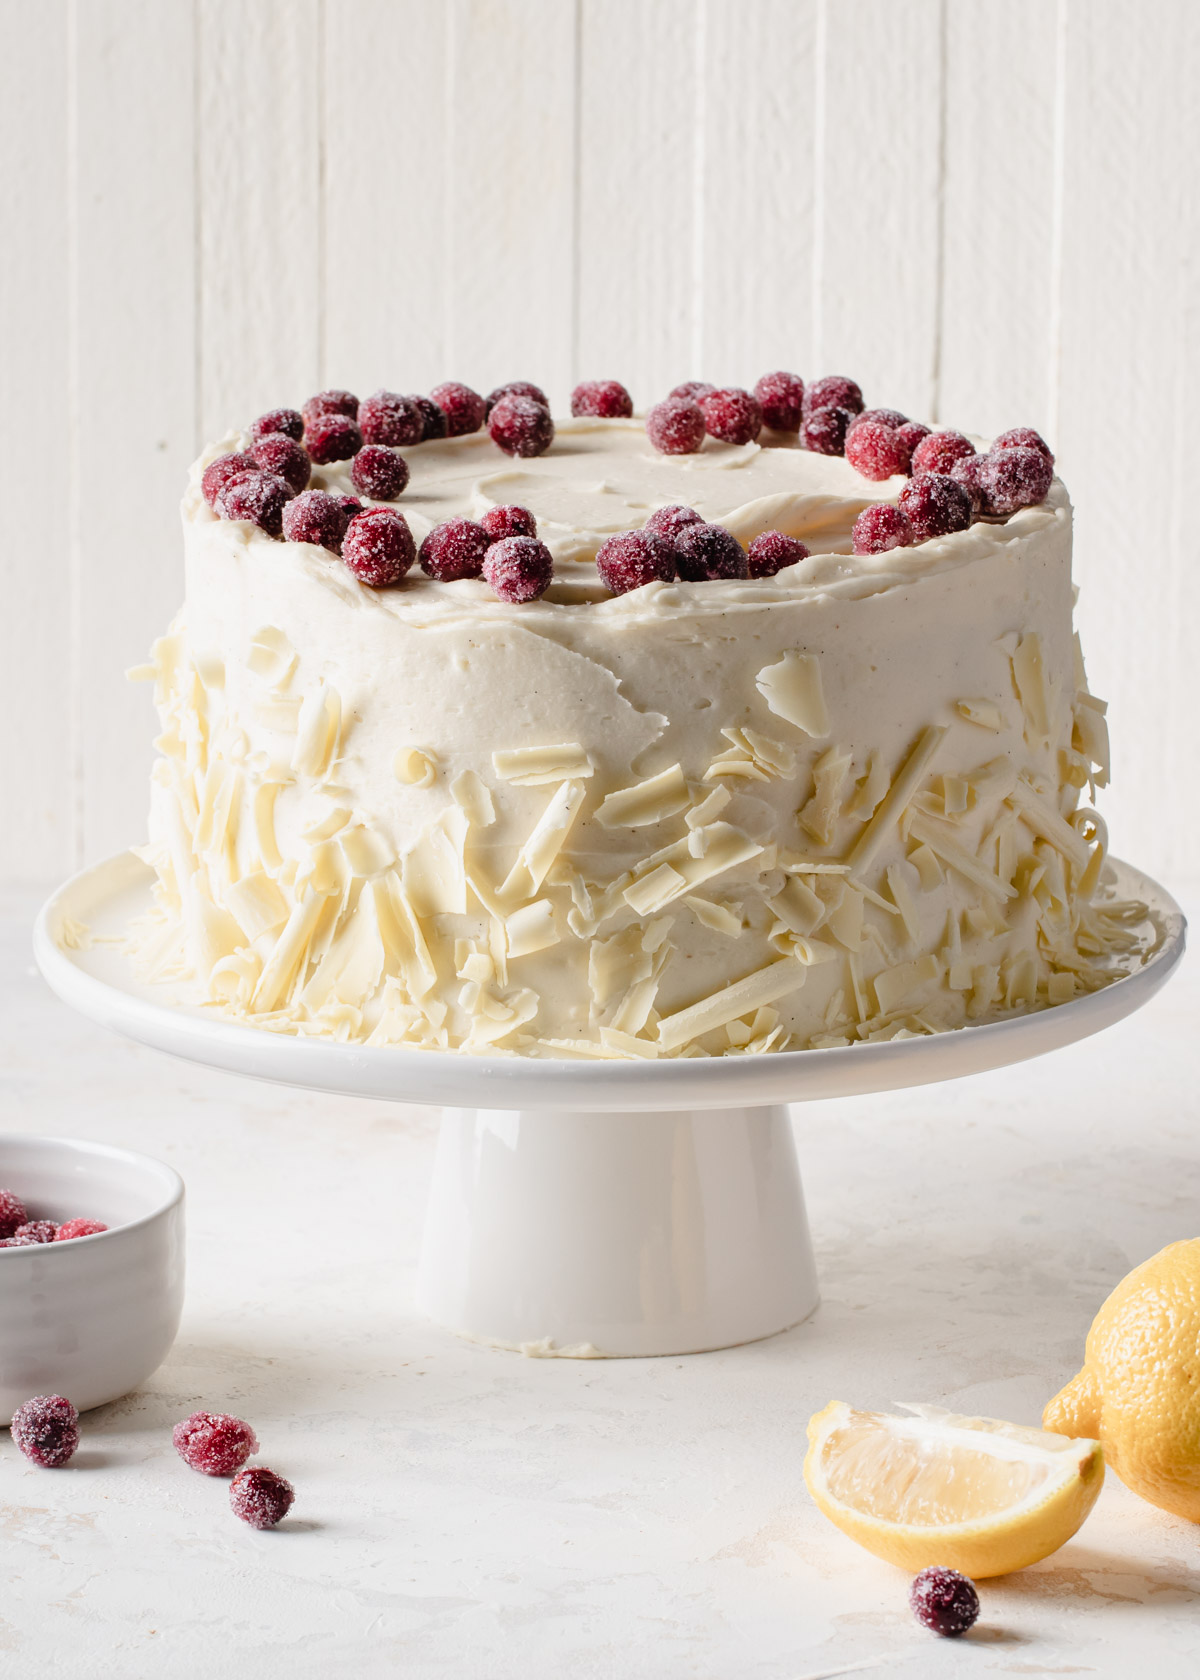 A lemon cake iced with cream cheese frosting and while chocolate curls around the sides 